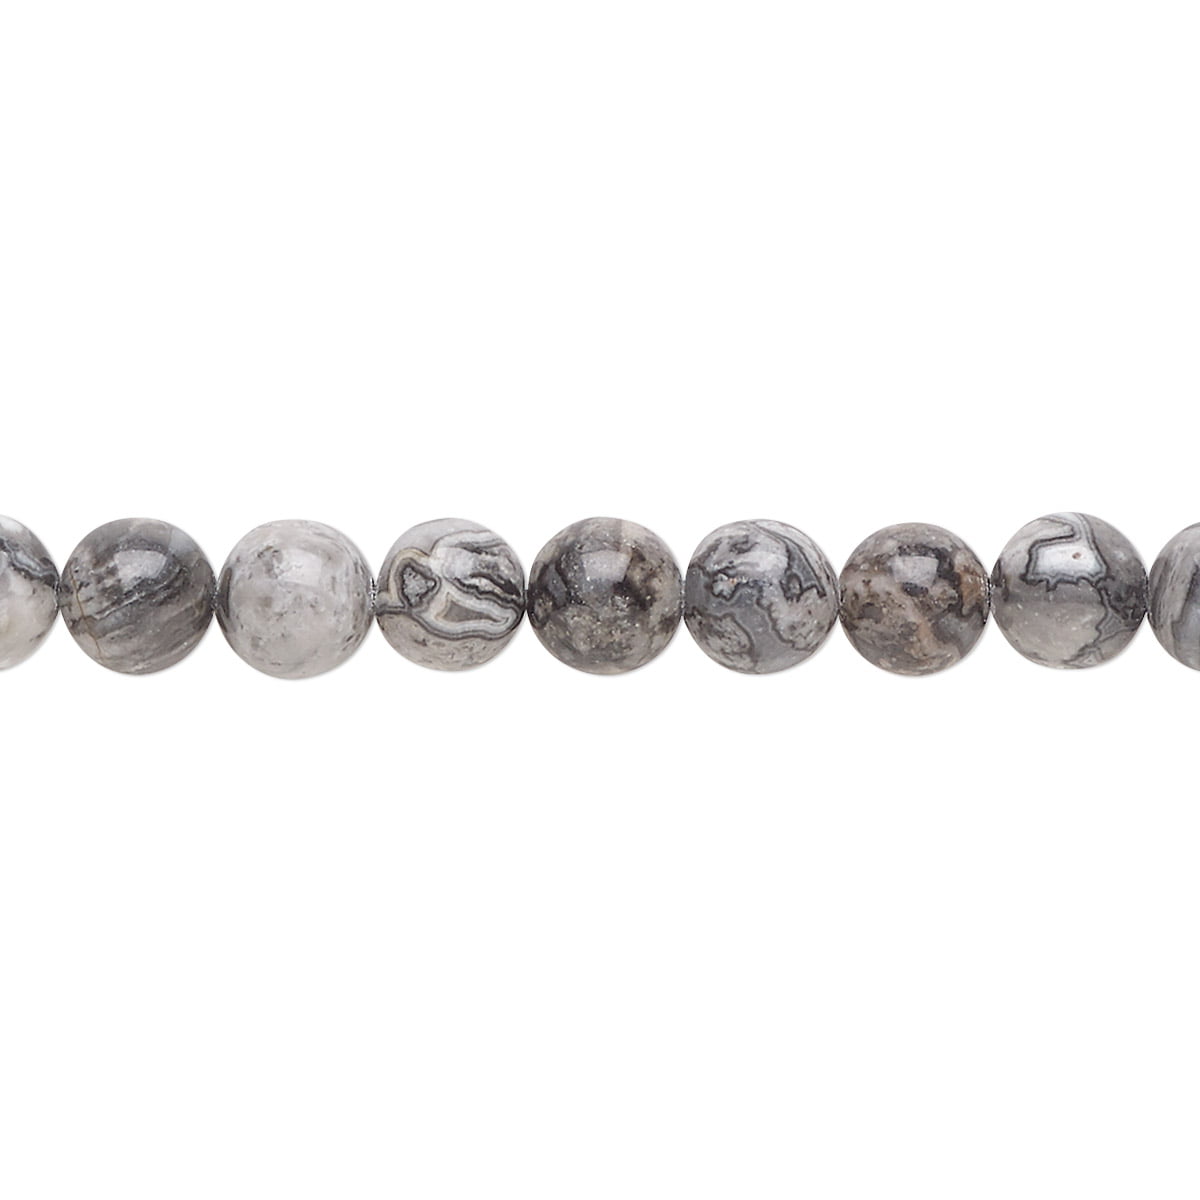 Smooth Silver Heishi Beads 6mm White Metal Large Hole 16 Inch Strand 